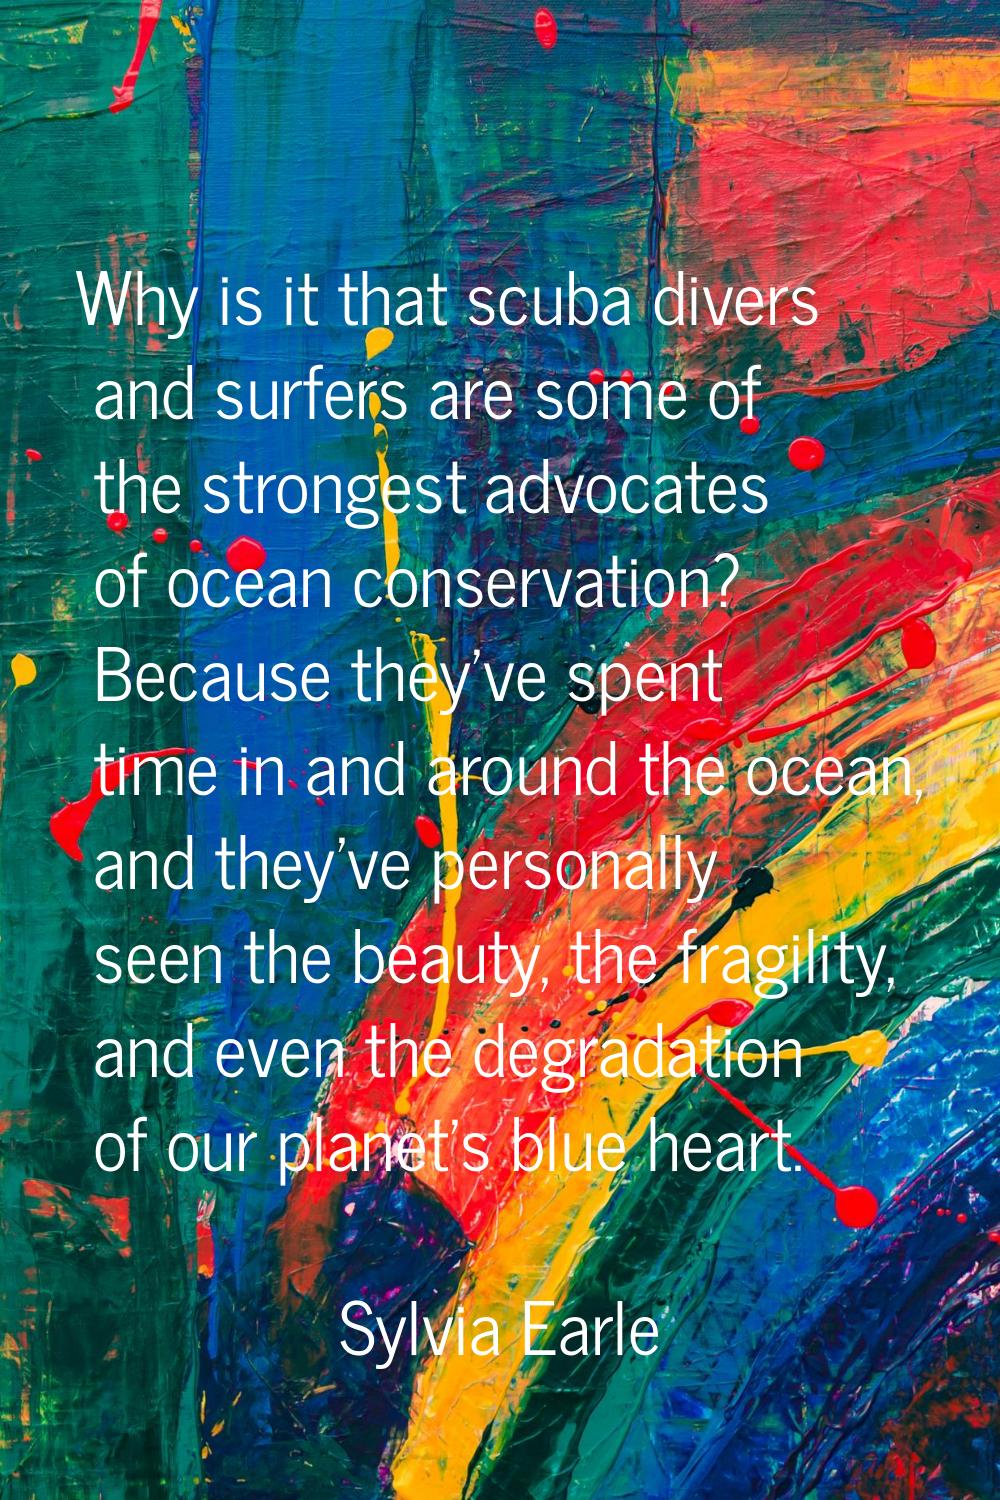 Why is it that scuba divers and surfers are some of the strongest advocates of ocean conservation? 